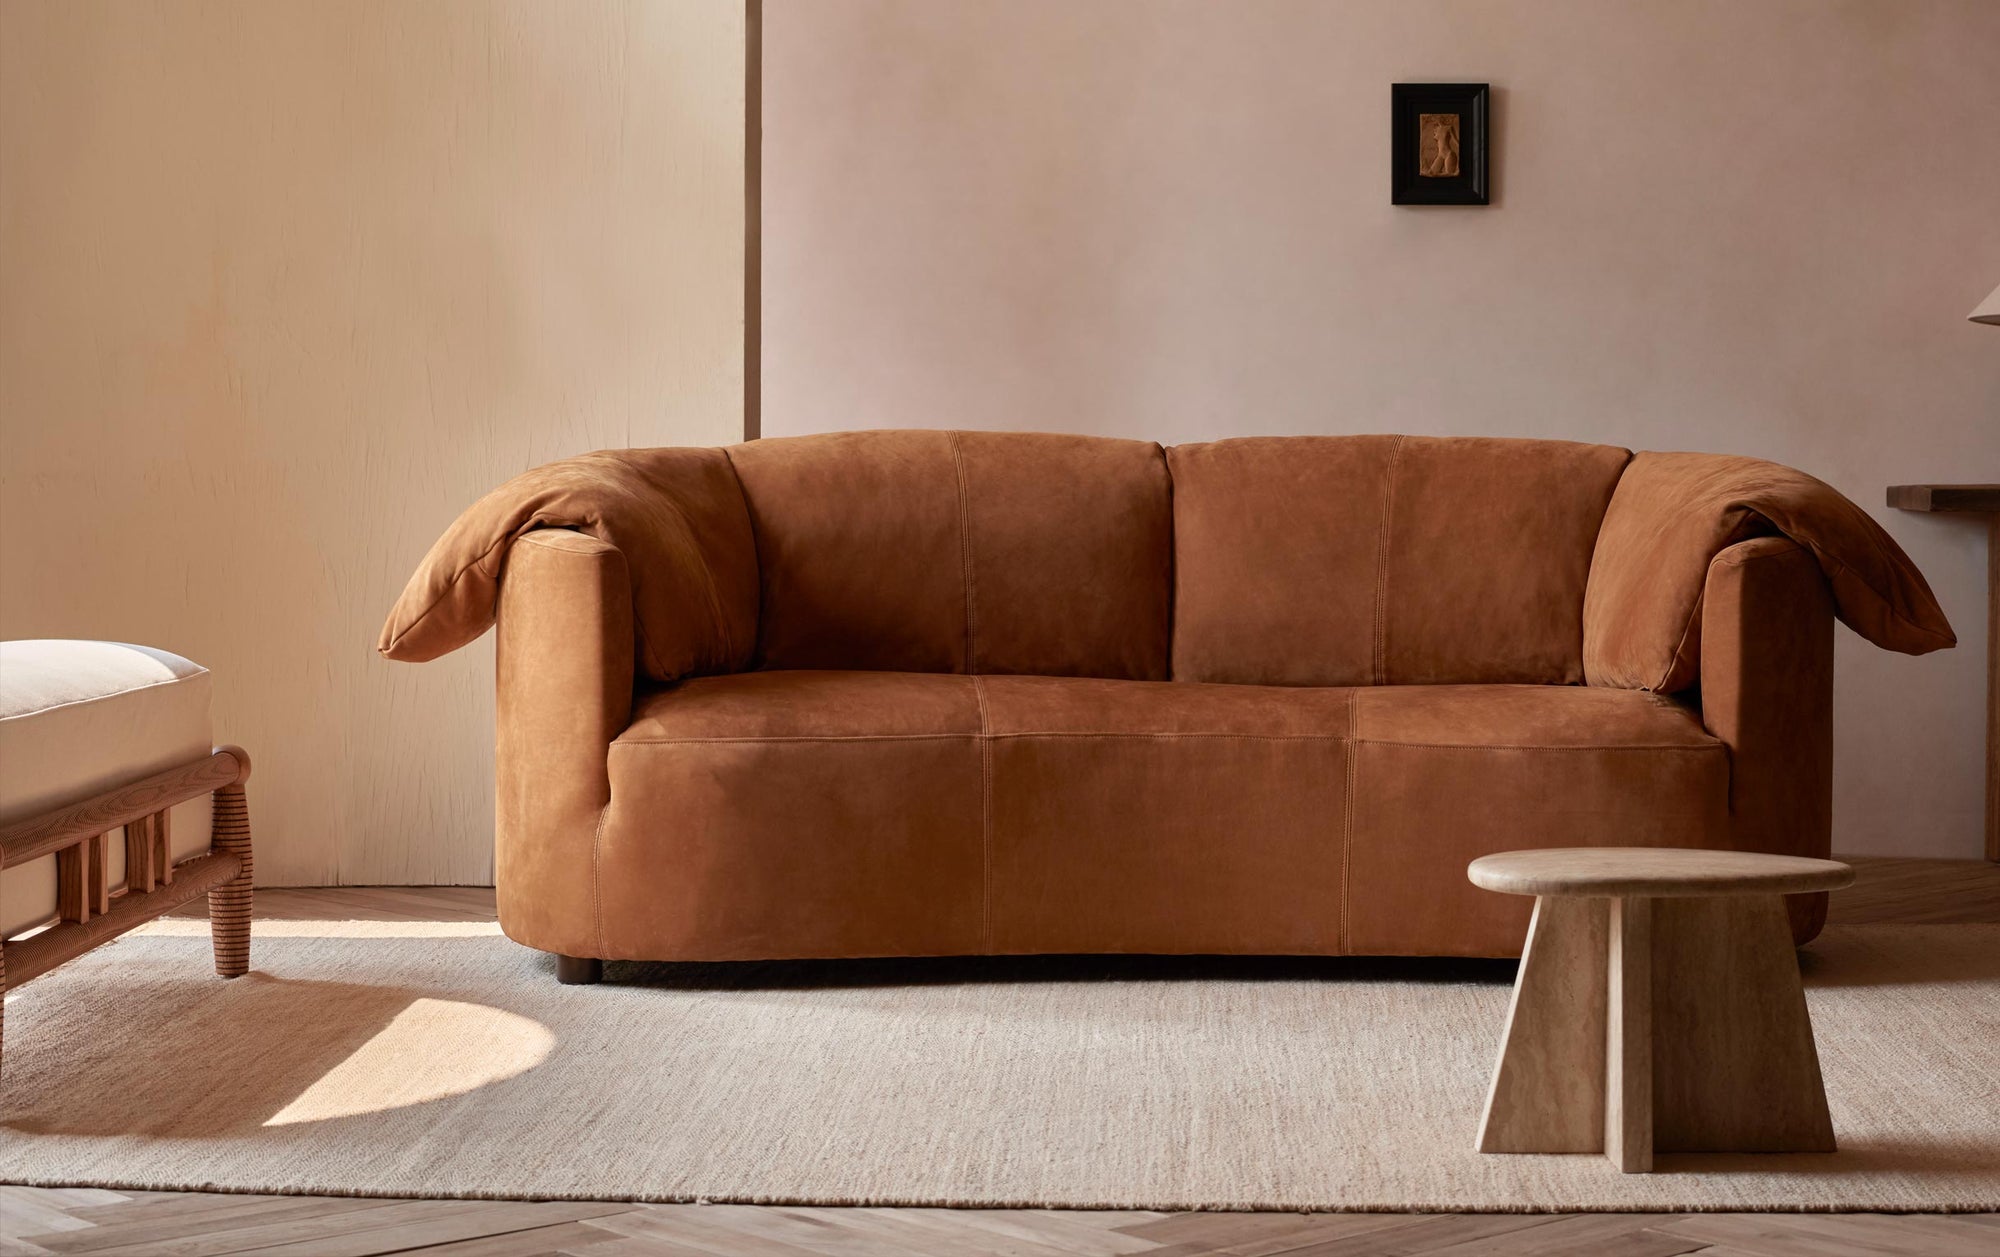 Loula Leather Sofa in Sunset Canyon, a cognac brown Meridian Leather, on a creamy beige carpet with a wooden side table